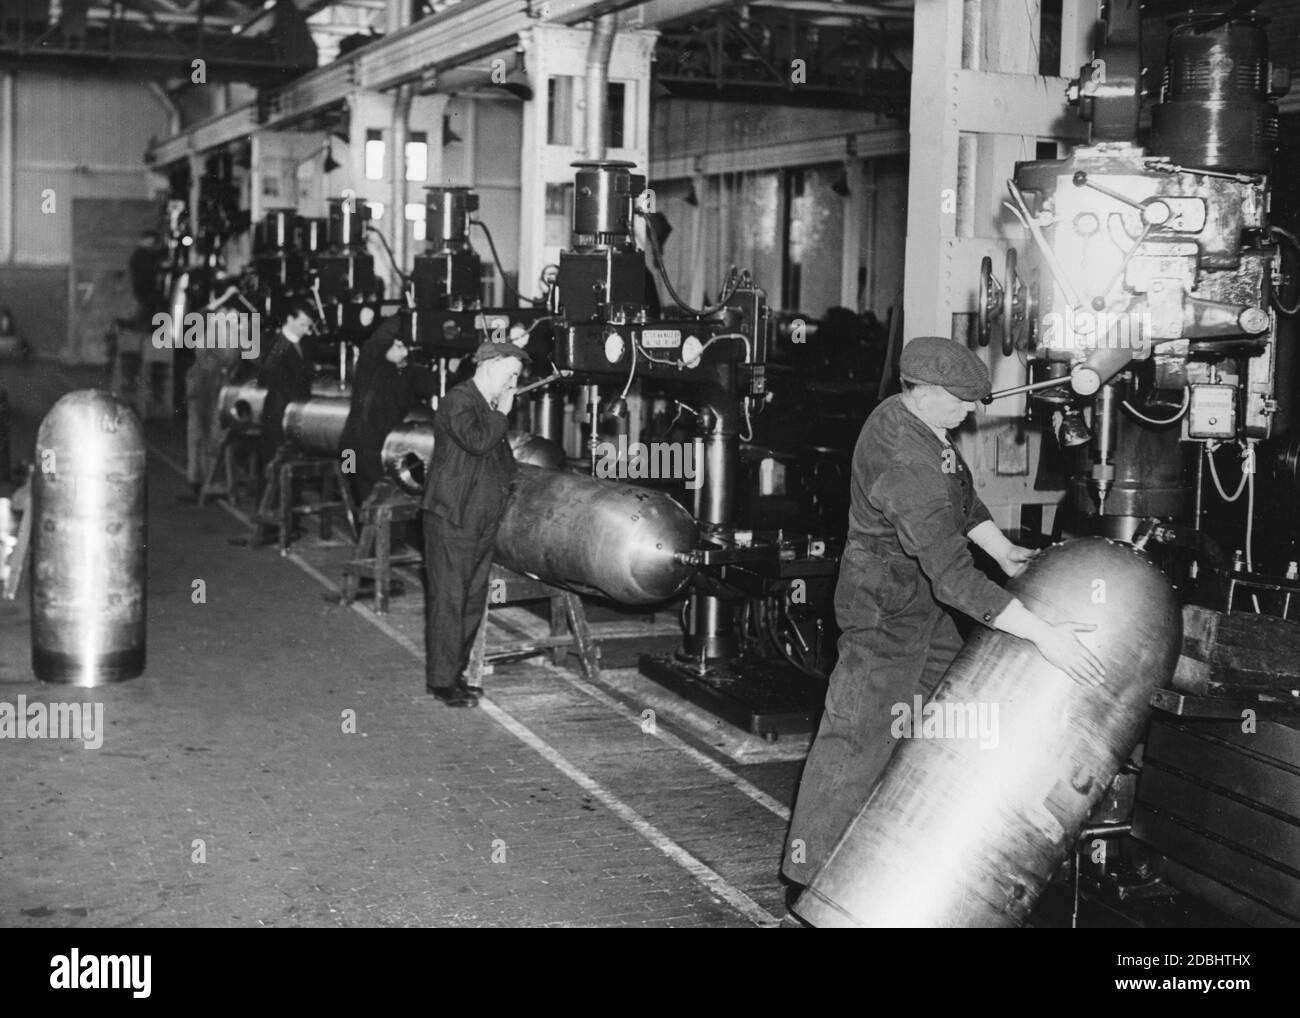 Production of torpedoes for the Royal Navy in an armaments factory in England. Stock Photo